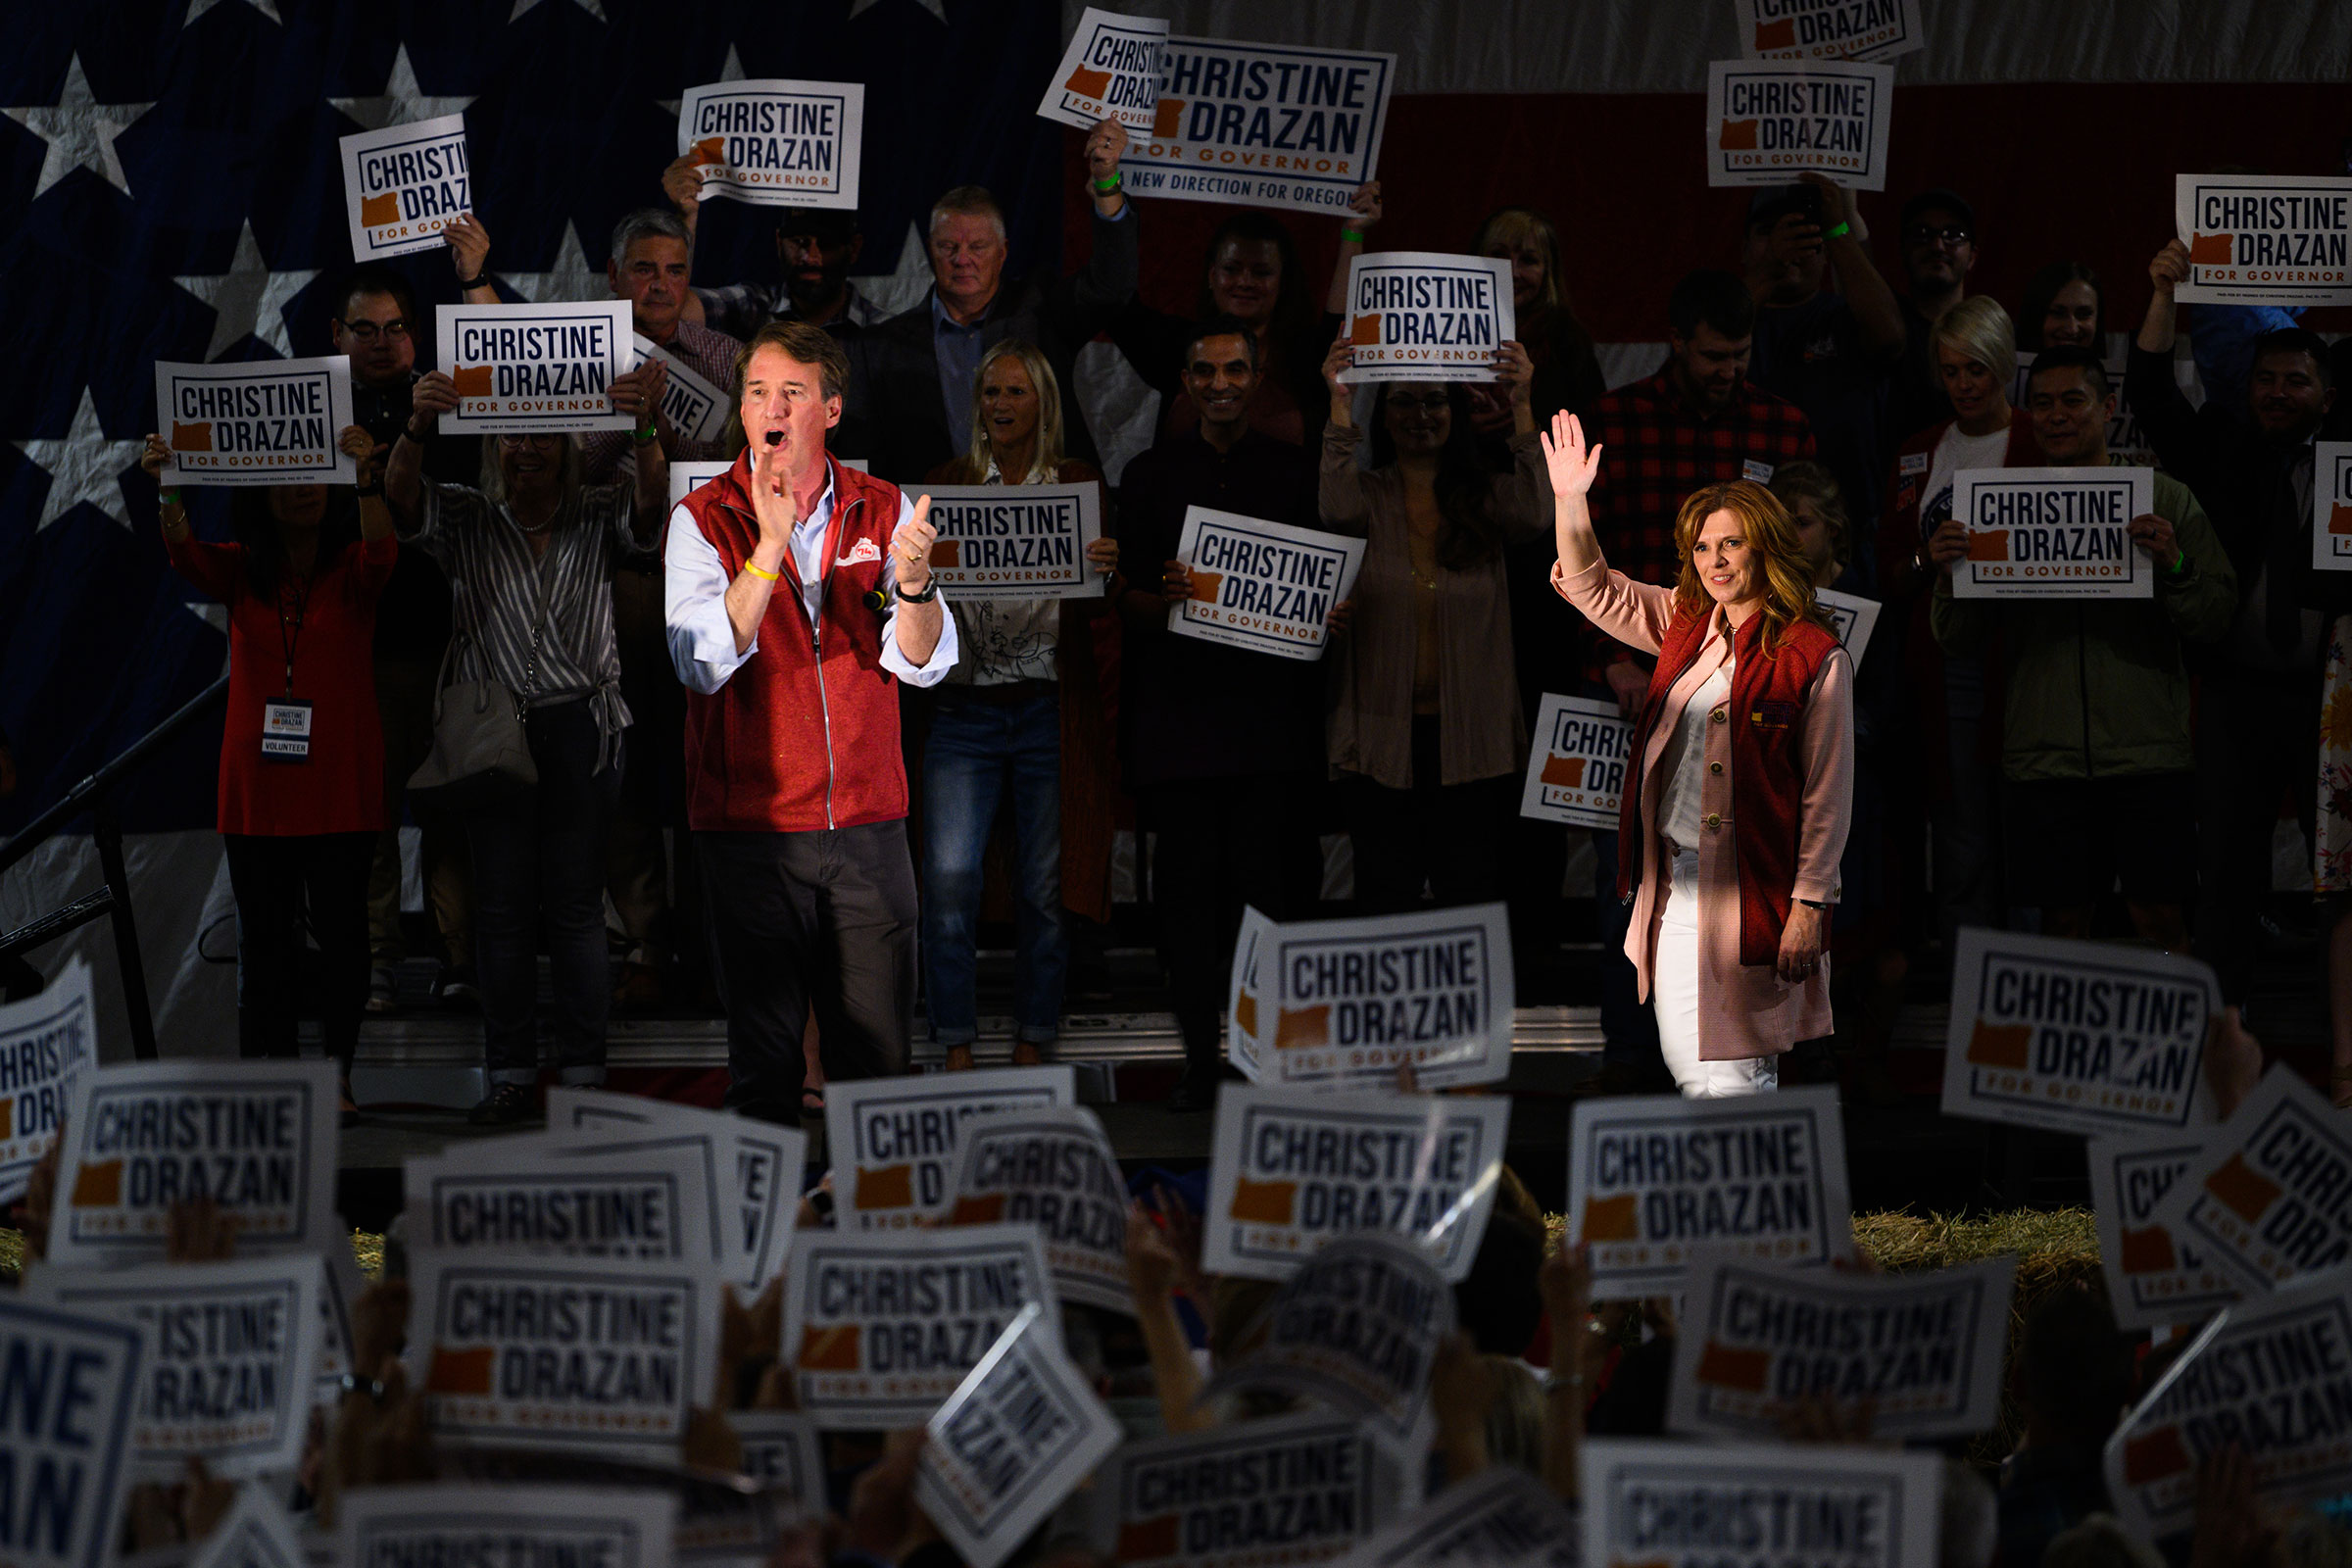 Virginia Gov. Glenn Youngkin speaks during a rally with Oregon gubernatorial candidate Christine Drazan in Aurora, Oreg. on Oct. 18, 2022. (Mathieu Lewis-Rolland—Getty Images)